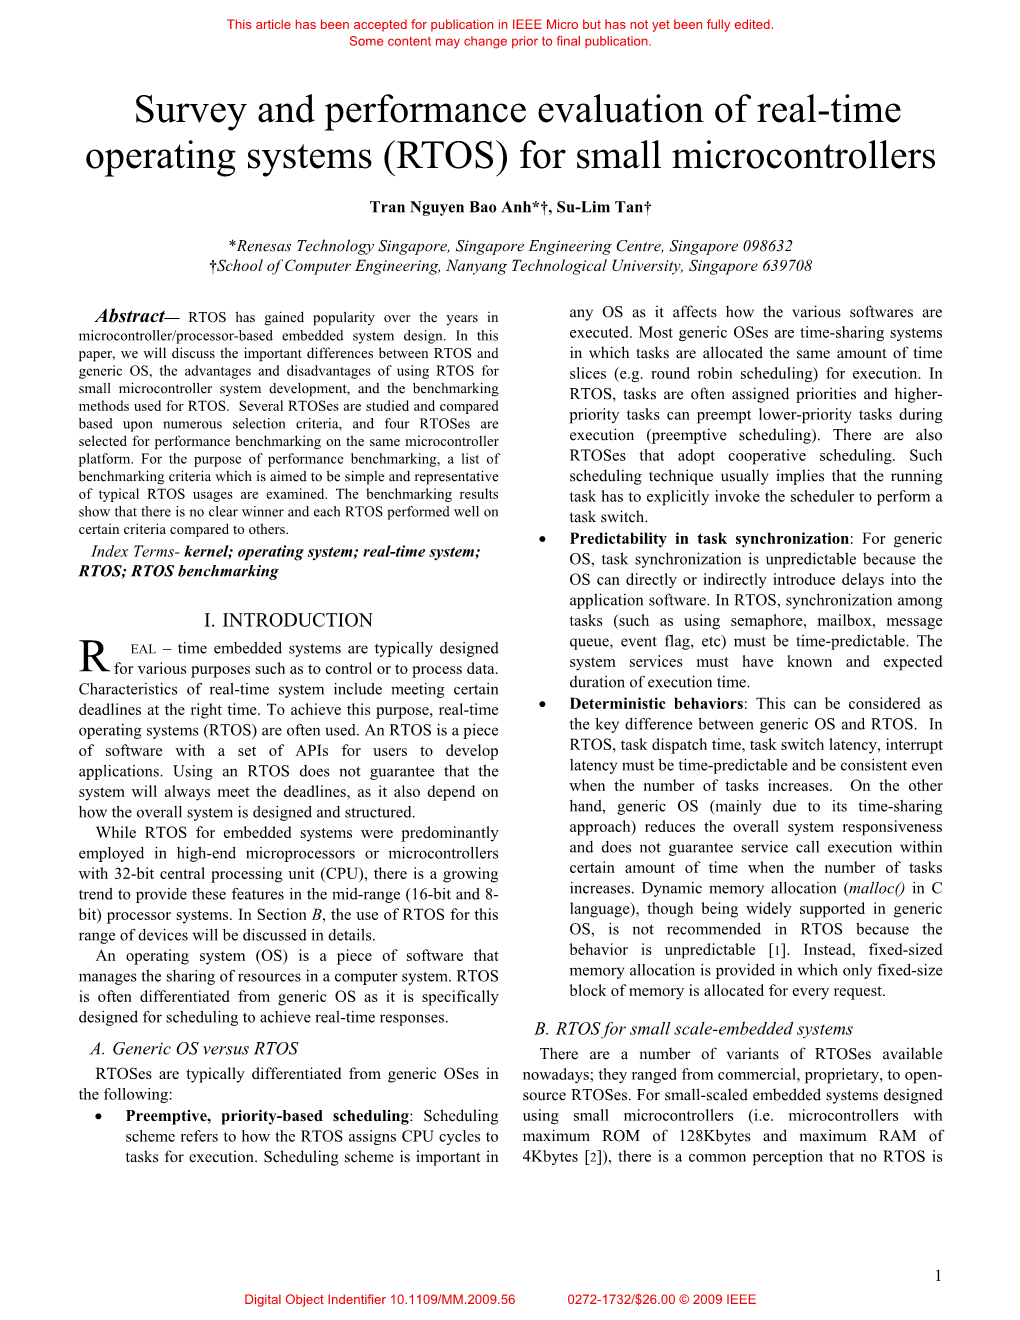 Survey and Performance Evaluation of Real-Time Operating Systems (RTOS) for Small Microcontrollers